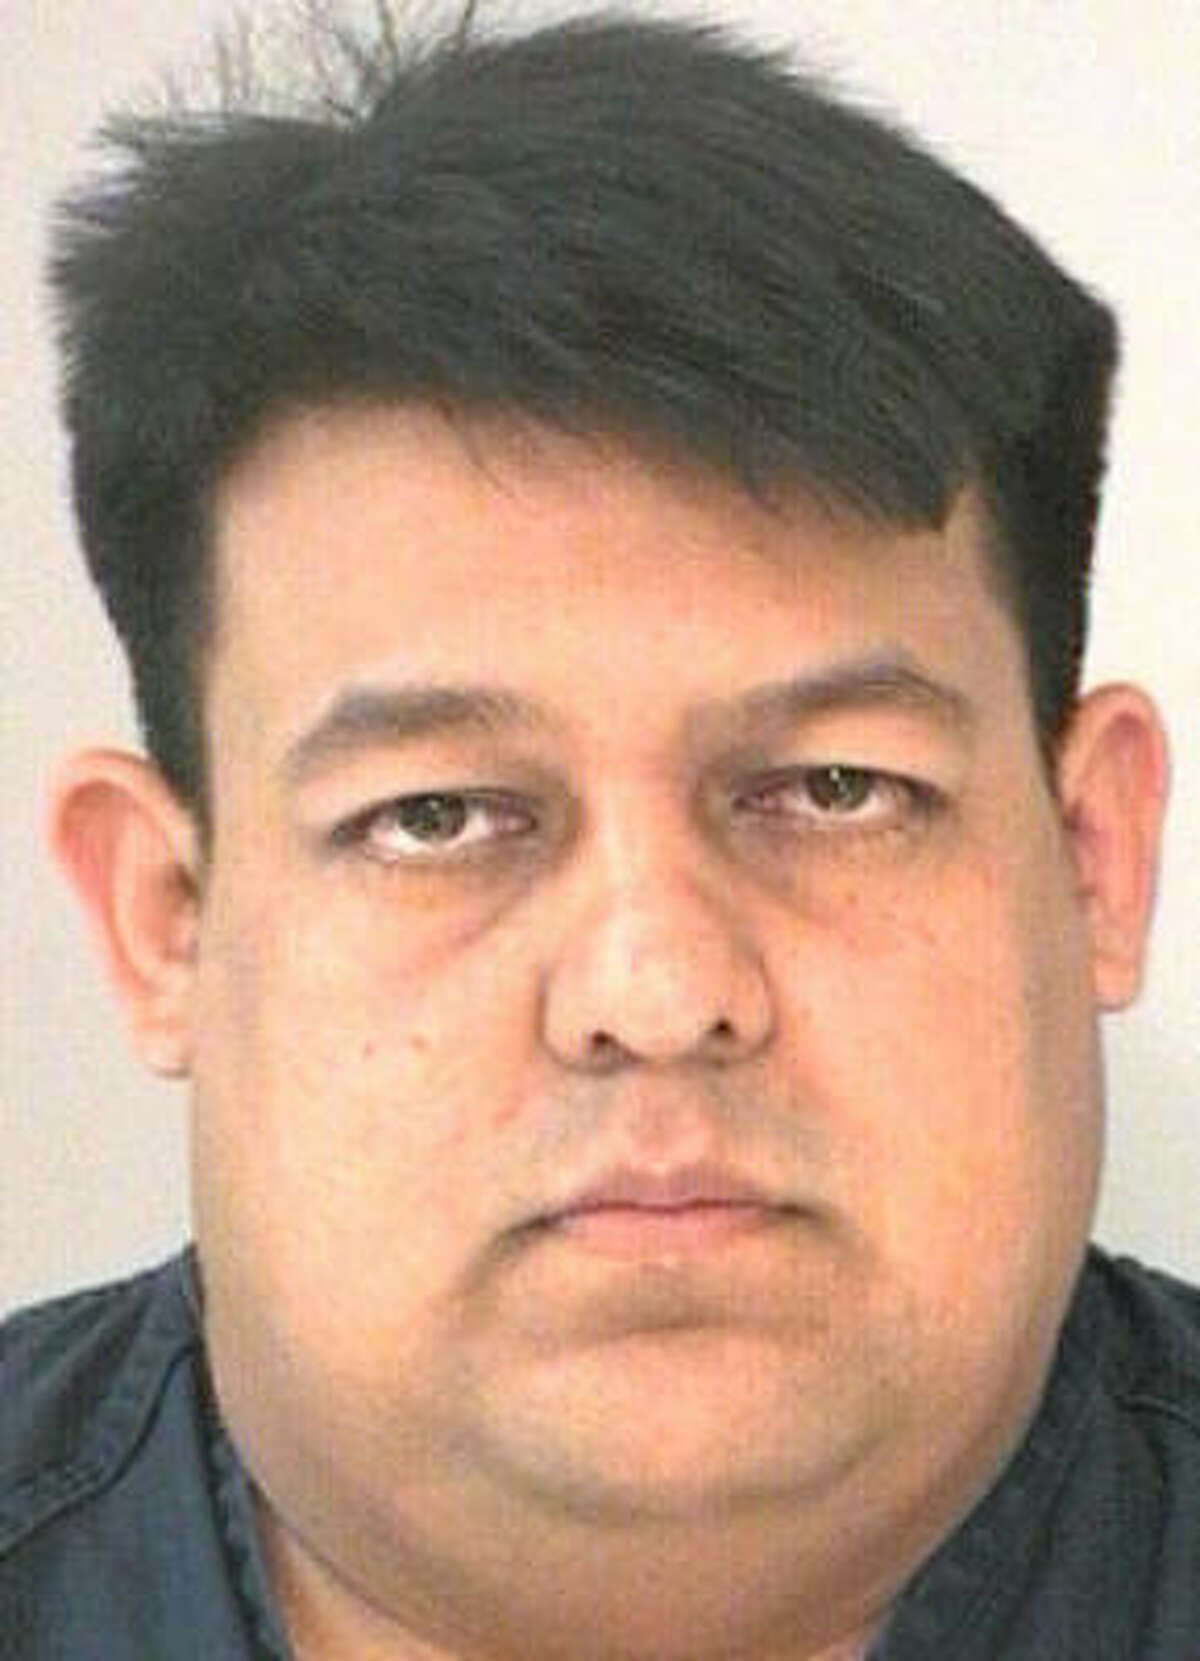 Deputy Jorge Figueroa, 39, was taken to Fort Bend County Jail and released on $50,000 bail.